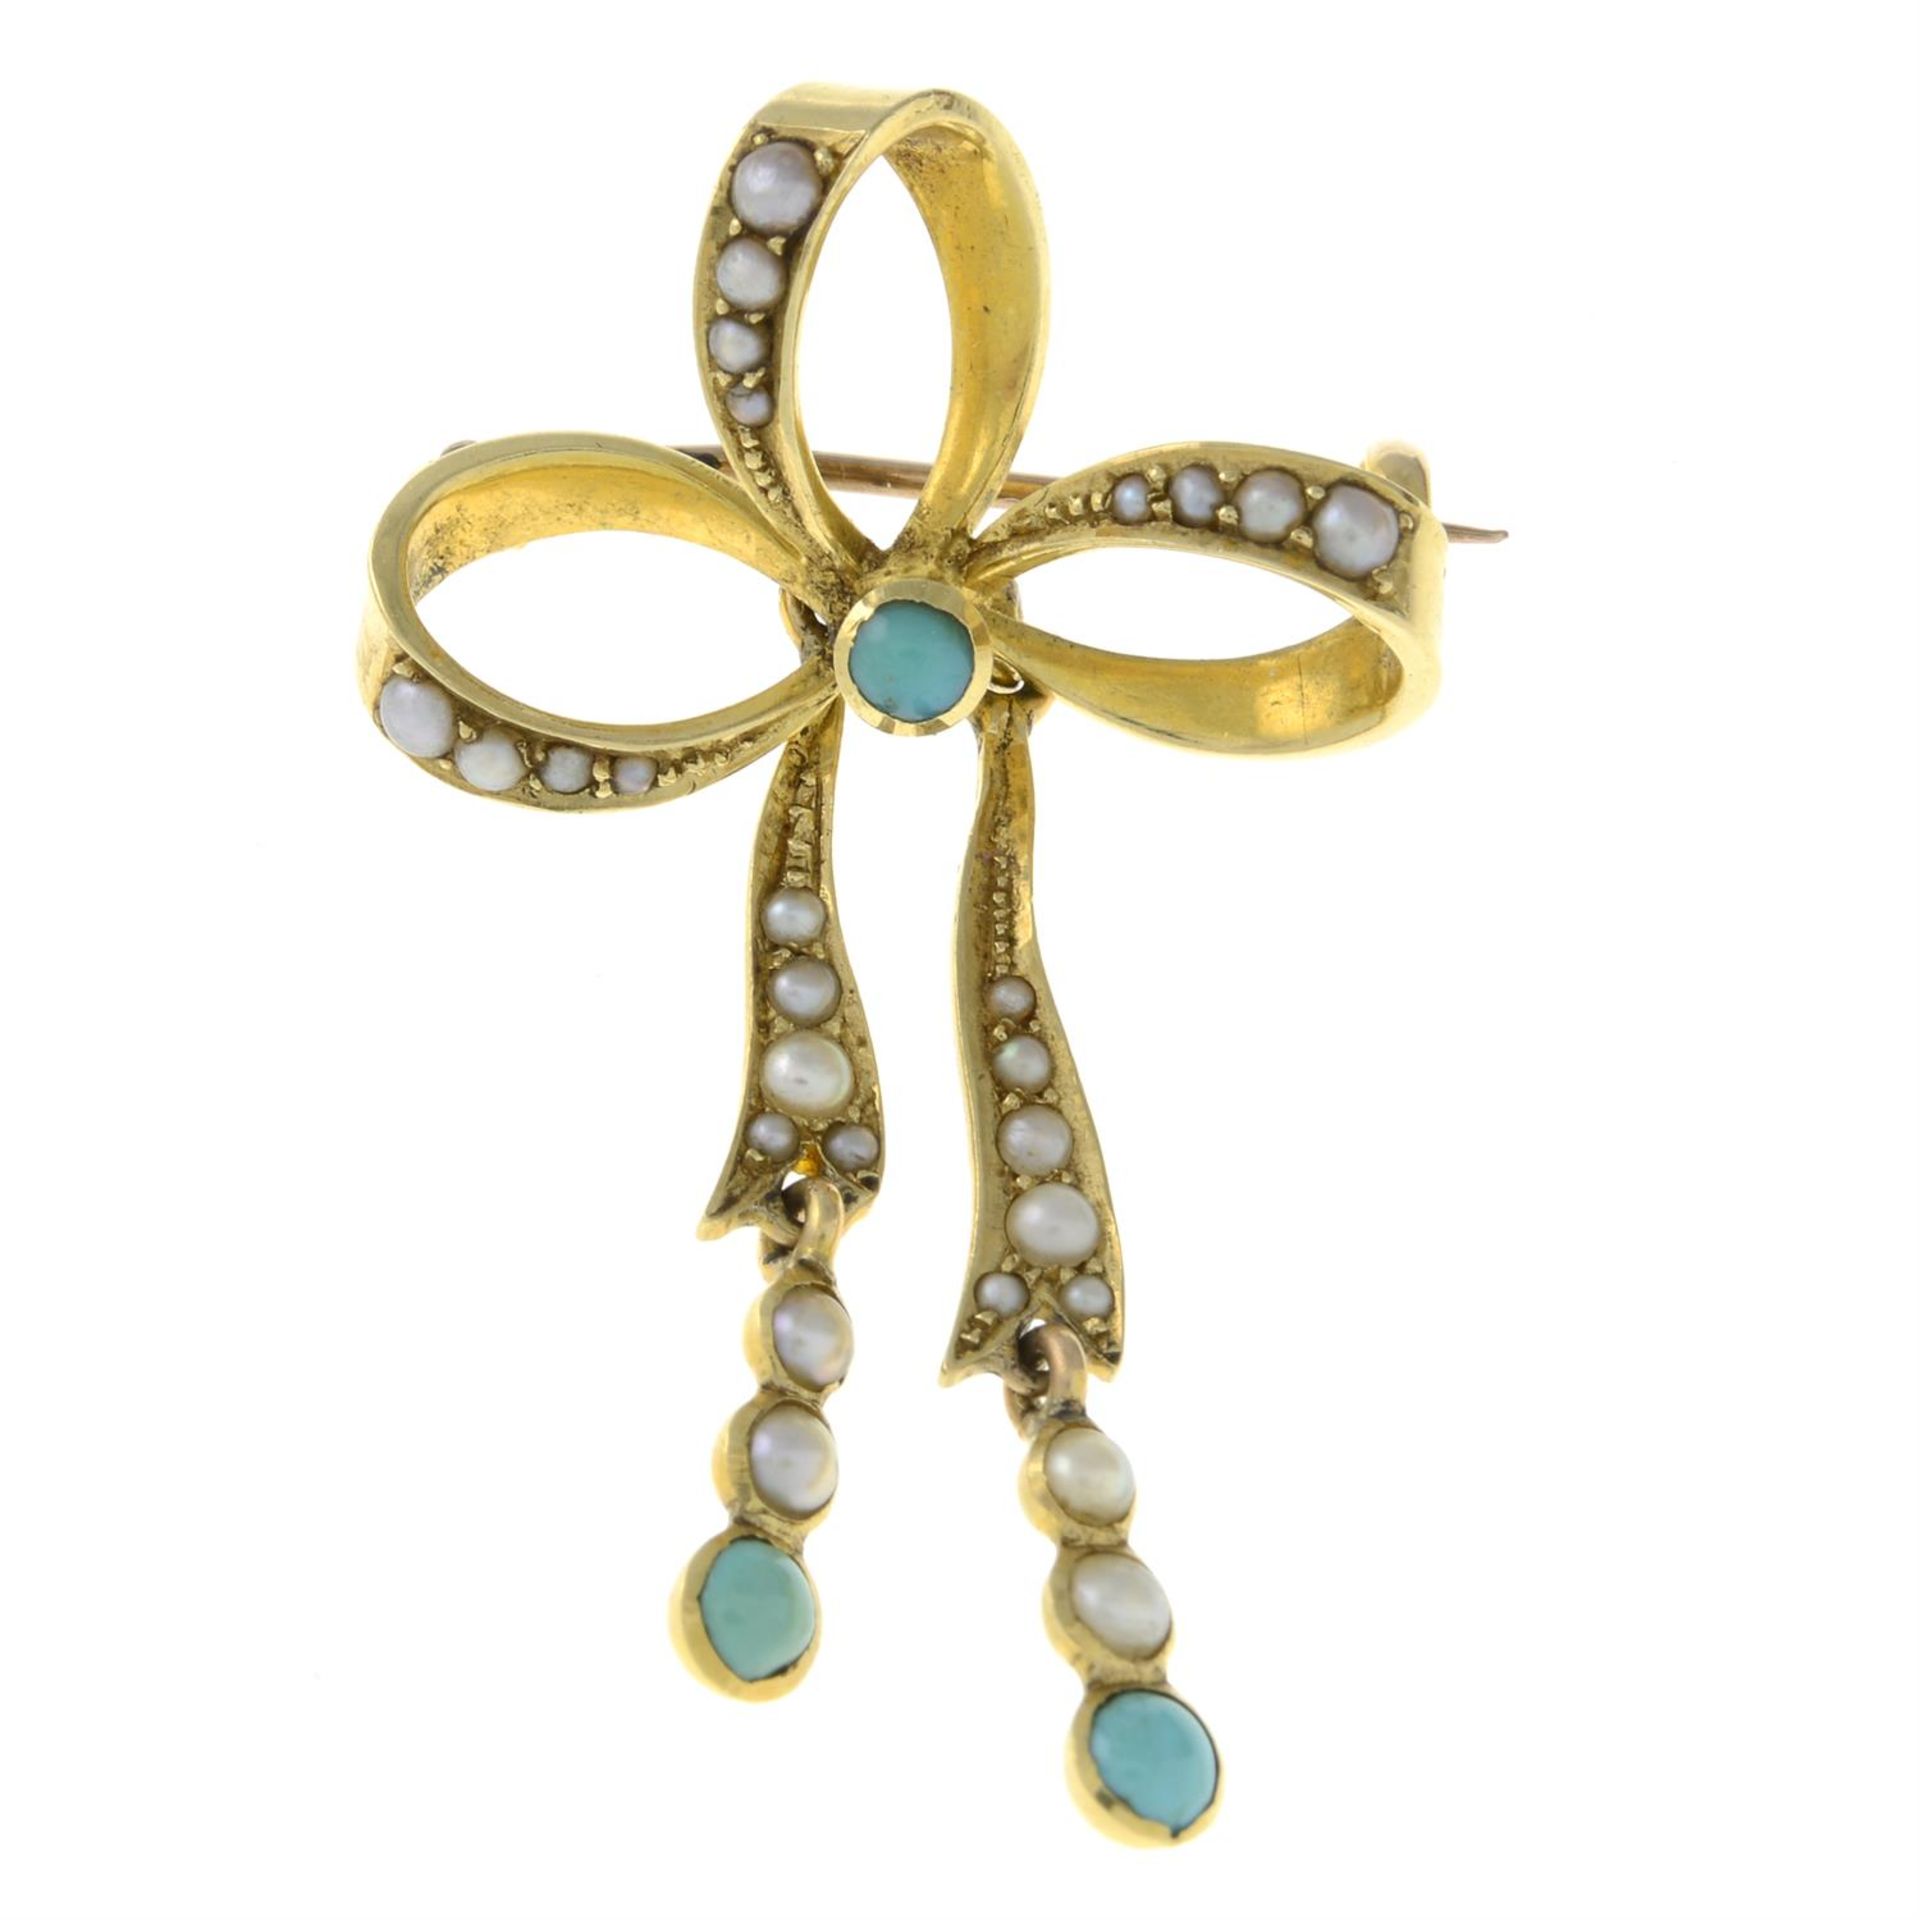 An early 20th century split pearl and turquoise bow brooch.